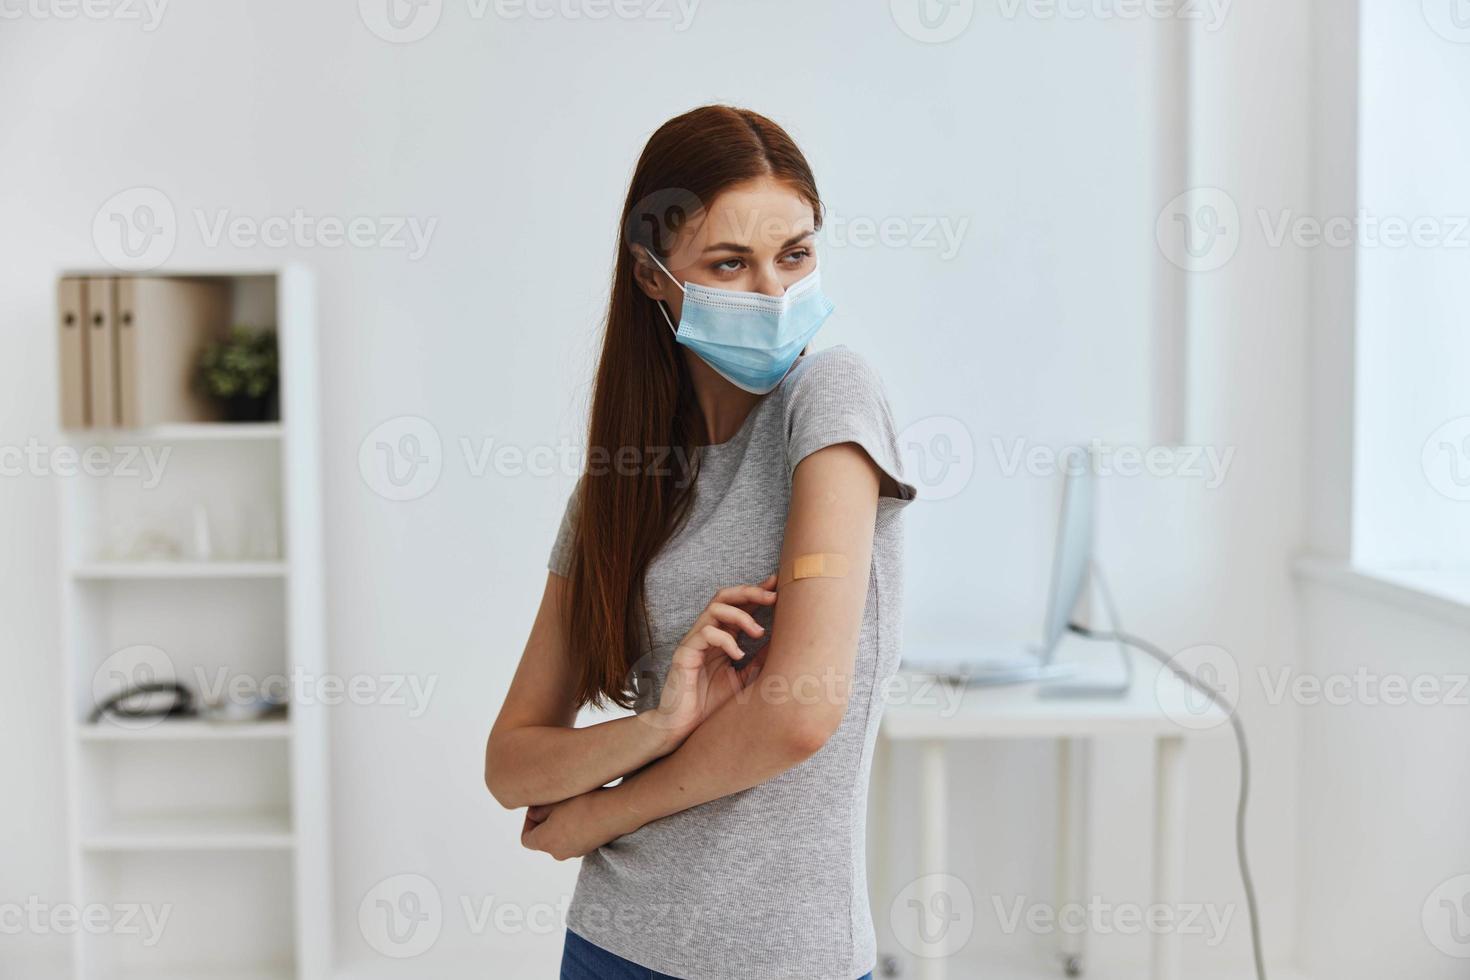 woman in hospital medical mask with germicidal plaster on shoulder looking out the window covid passport photo